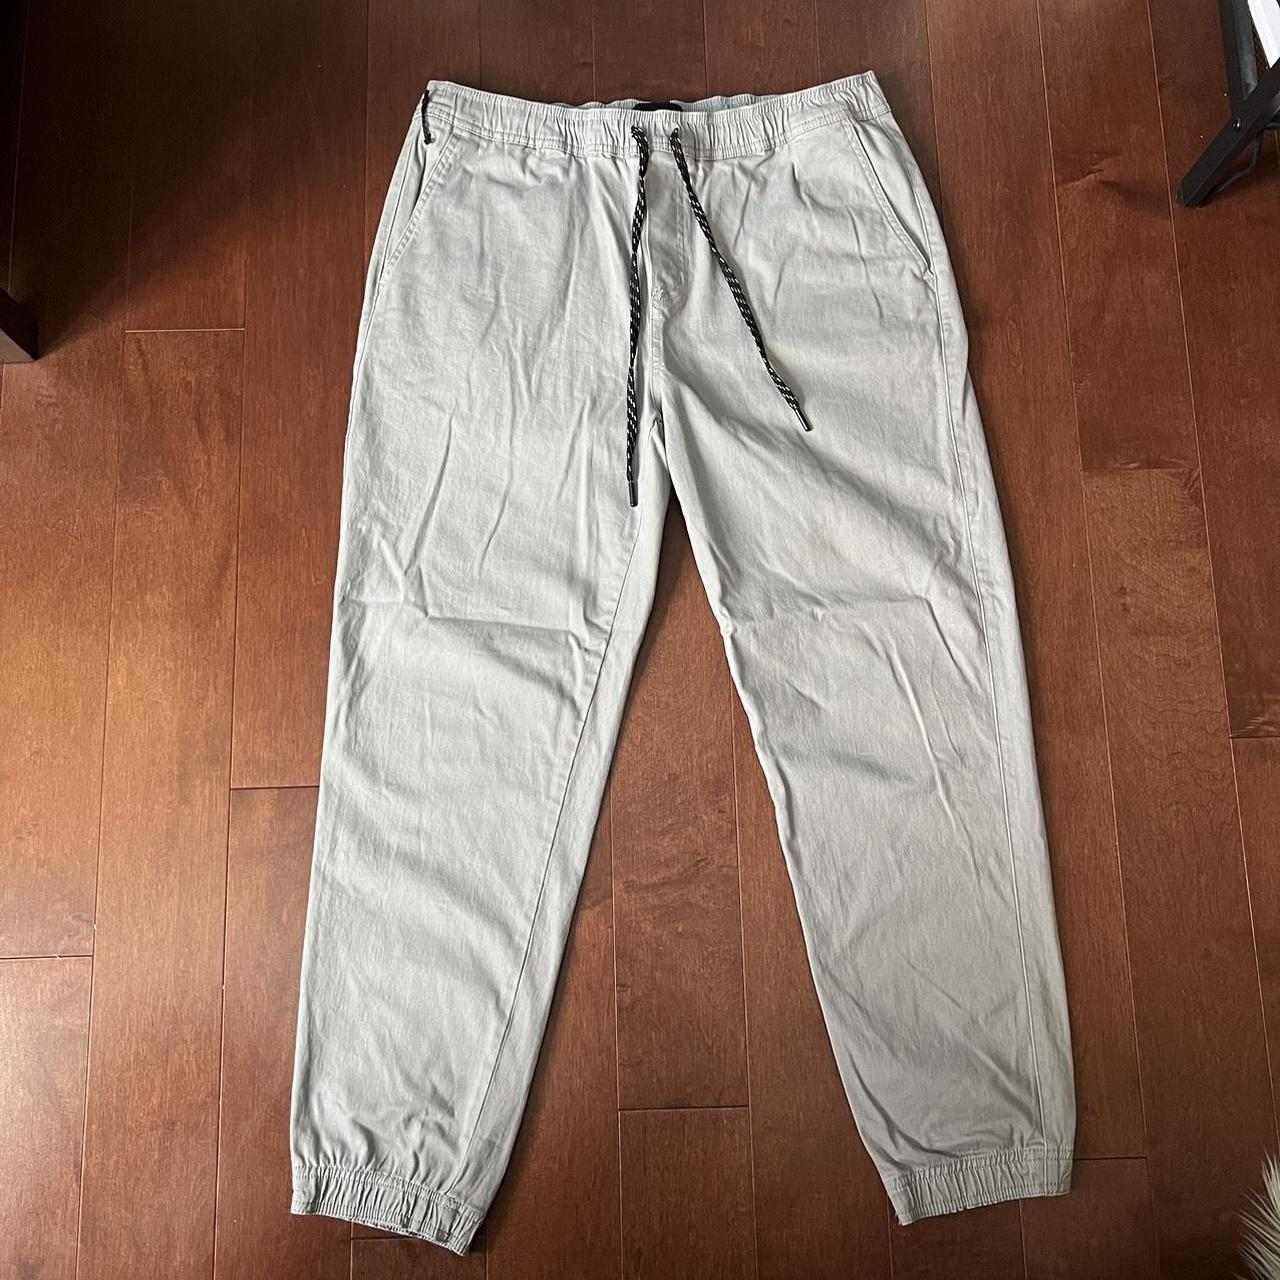 XL RSQ Men's Grey Joggers - worn once or twice - no - Depop